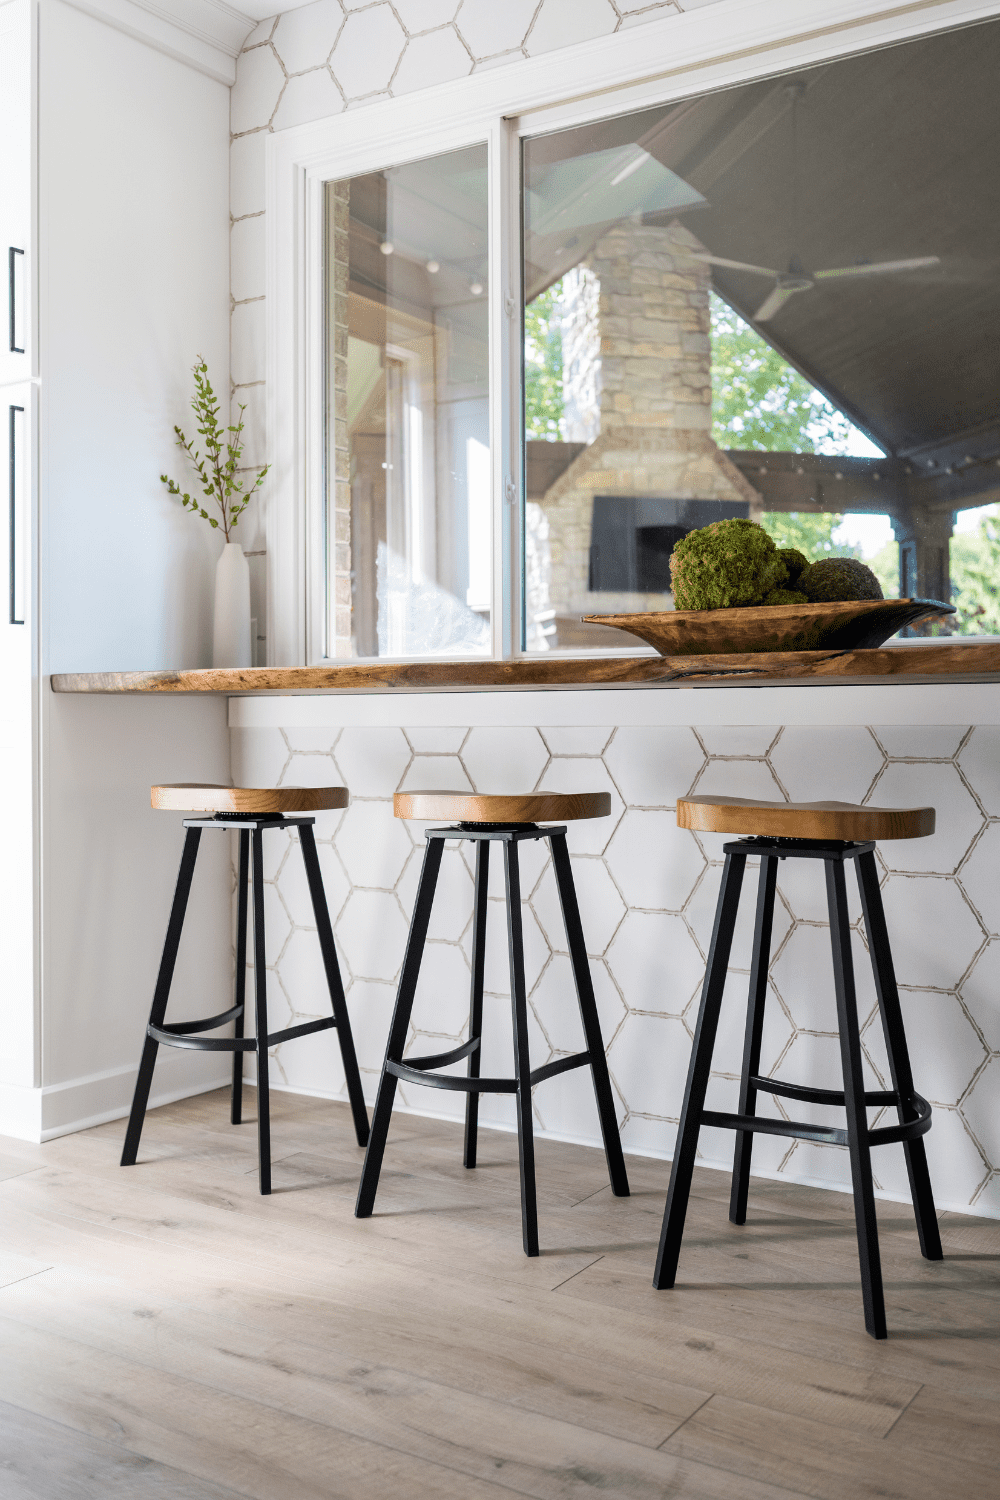 Nicholas Design Build | Three bar stools in a kitchen with white tile.